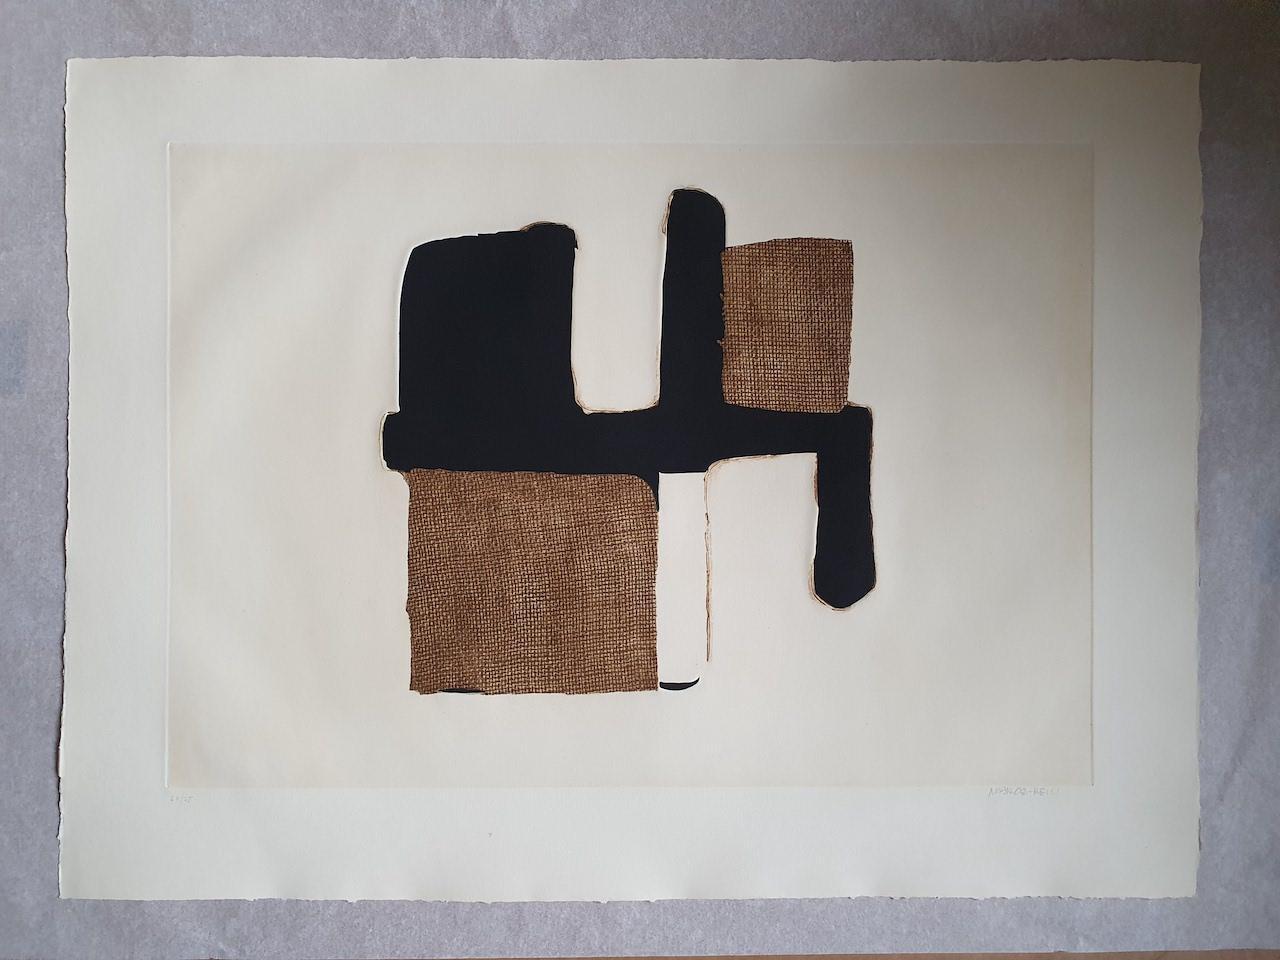 Conrad Marca-Relli
Composition 13
60/75
Mixed media on guarro paper
Poligrafa Edition
Numbered out of 75 and signed in pencil by the artist 
Circa 1977
Work: 43 x 63 cm
With margin: 56 x 77 cm
Perfect condition 
1100 euros 